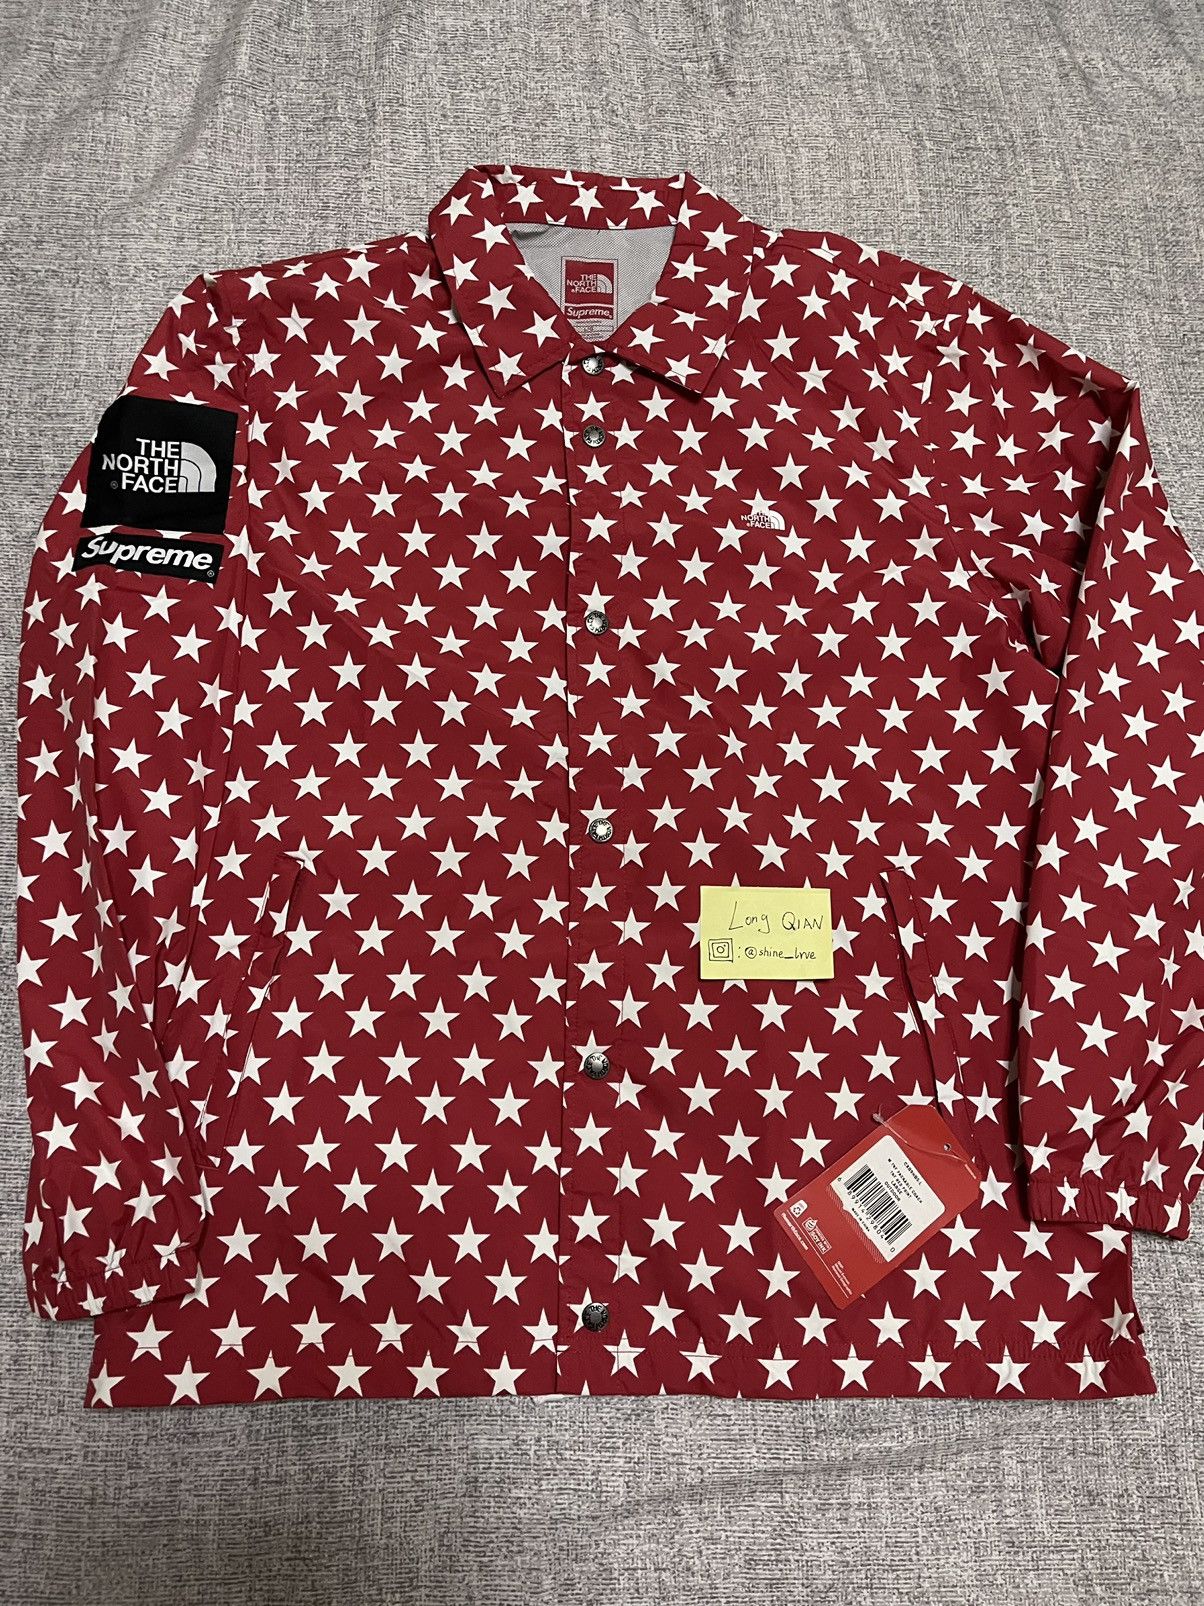 Supreme Supreme tnf the north face 15ss red star stars coach jacket |  Grailed